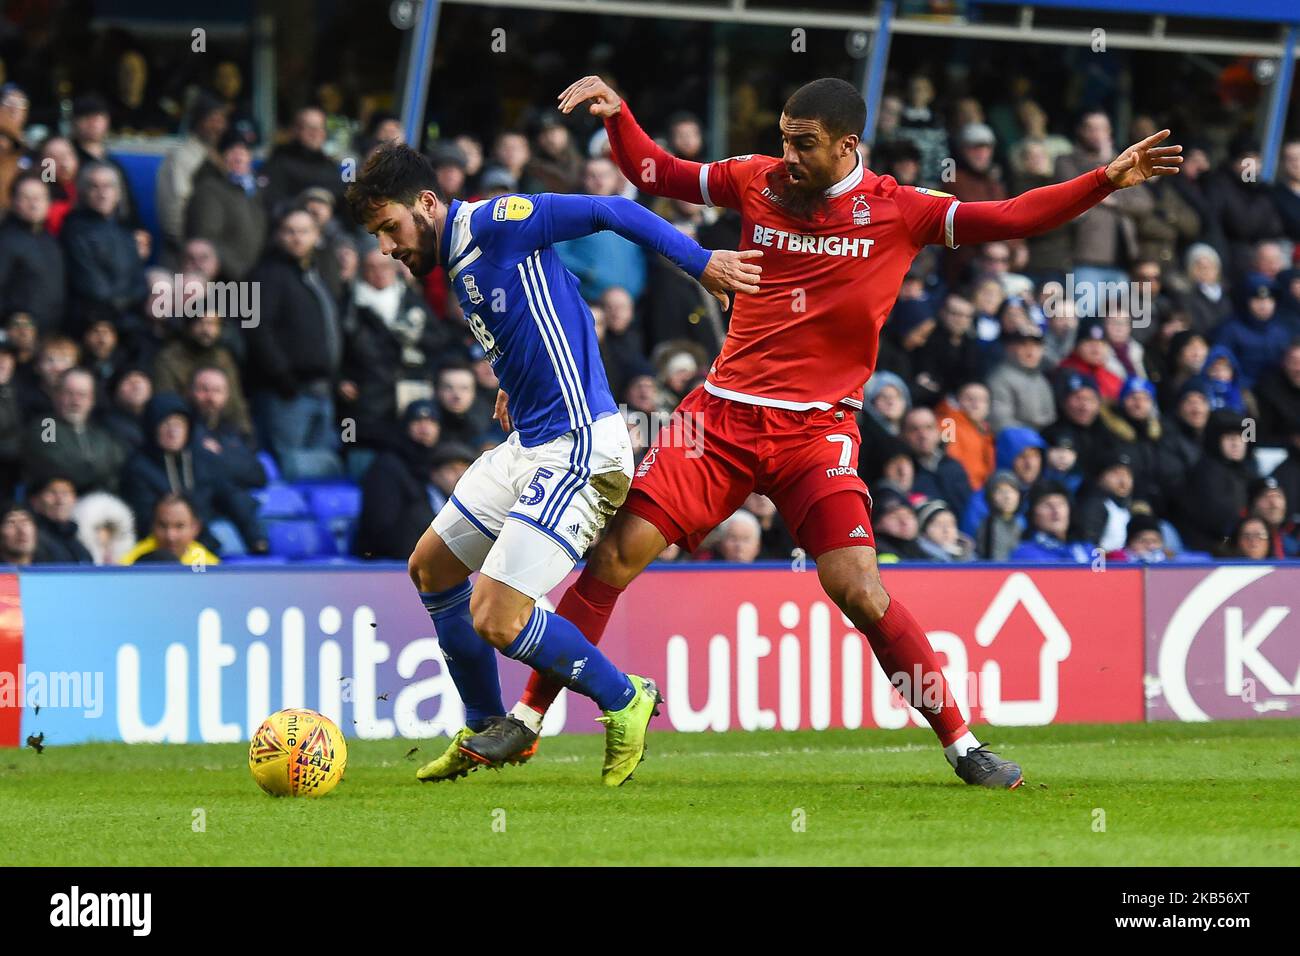 Birmingham City Defender Maxime Colin (5) holds off Lewis Grabban (7) of Nottingham Forest during the Sky Bet Championship match between Birmingham City and Nottingham Forest at St Andrews in Birmingham, UK on Saturday February 2, 2019. (Photo by MI News/NurPhoto) Stock Photo